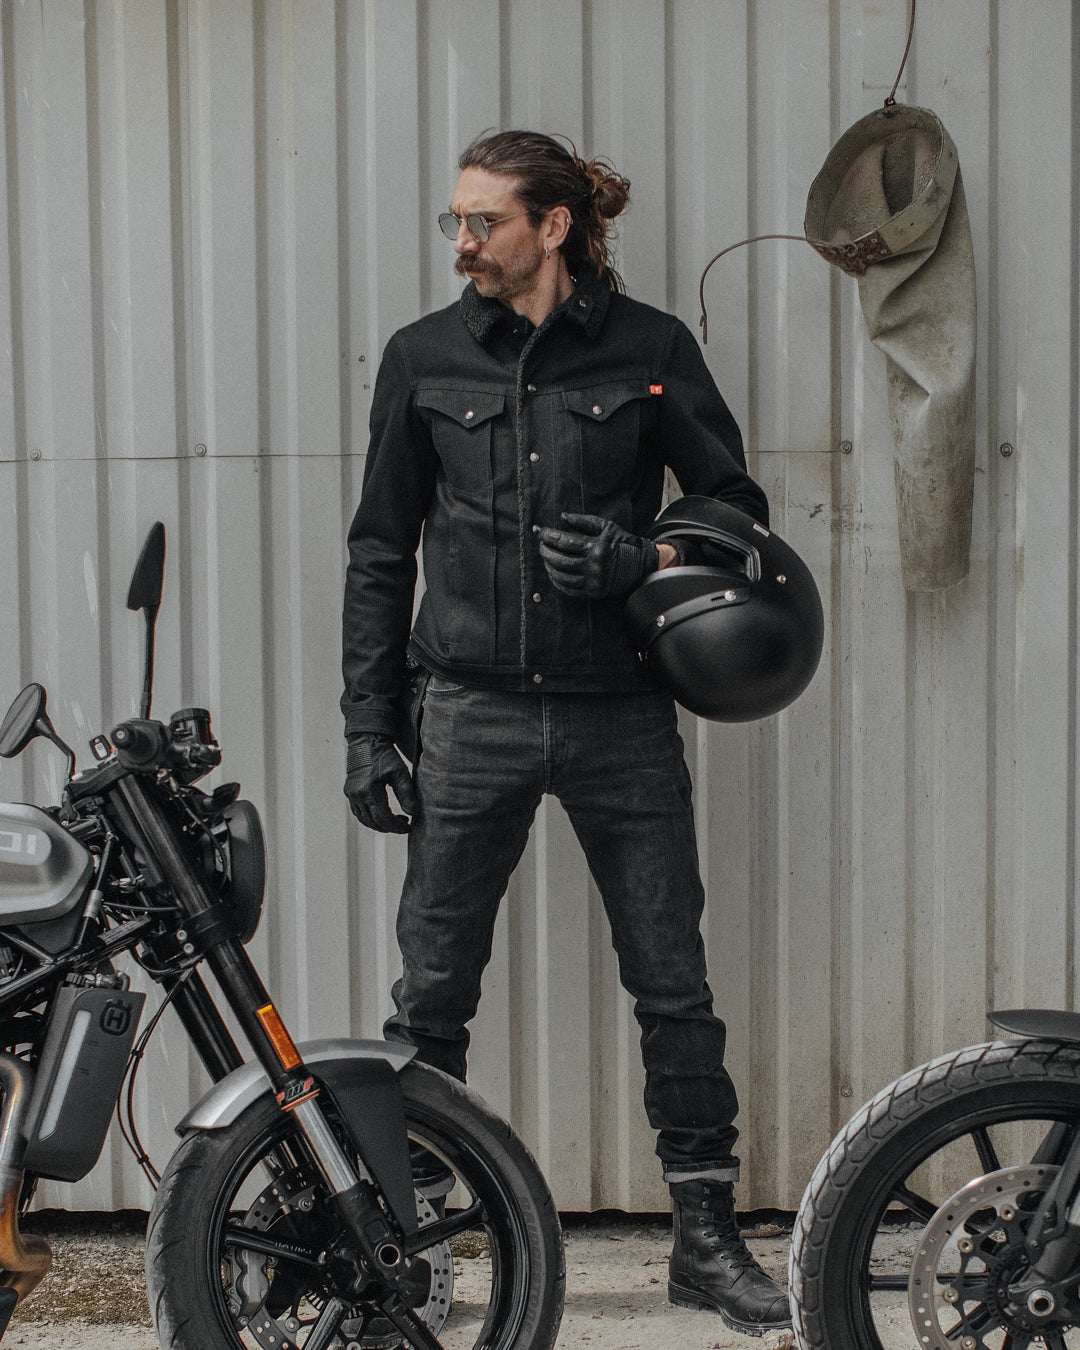 This Motorcycle Company Produced Jeans Using Kevlar and Cordura Nylon